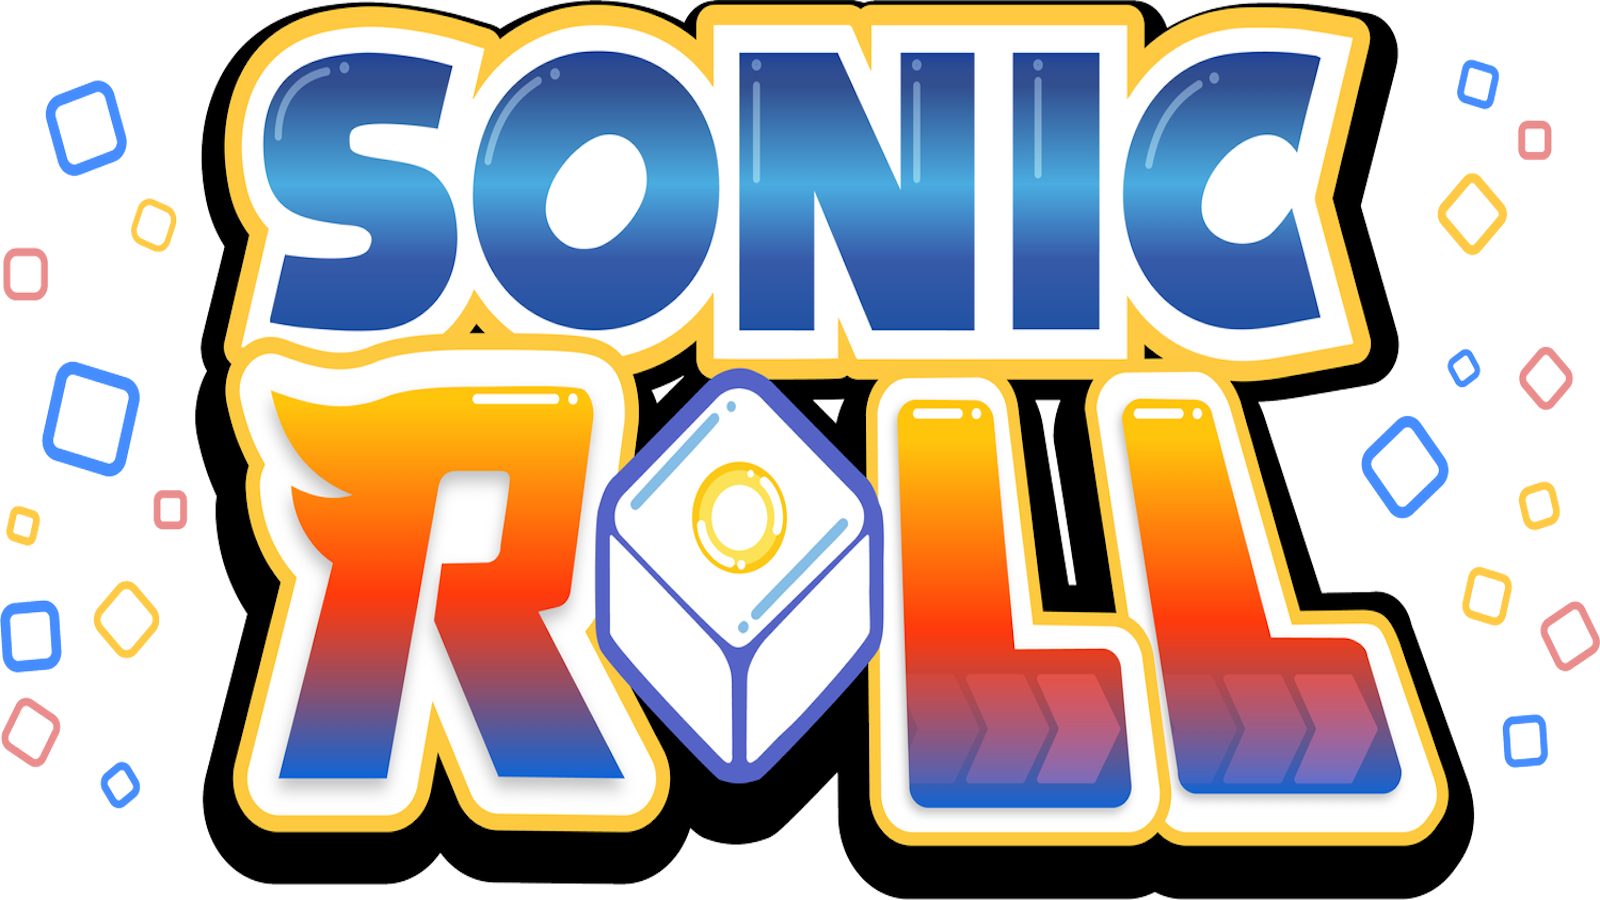 Sonic Classic Collection - Trailer & Press Release Online